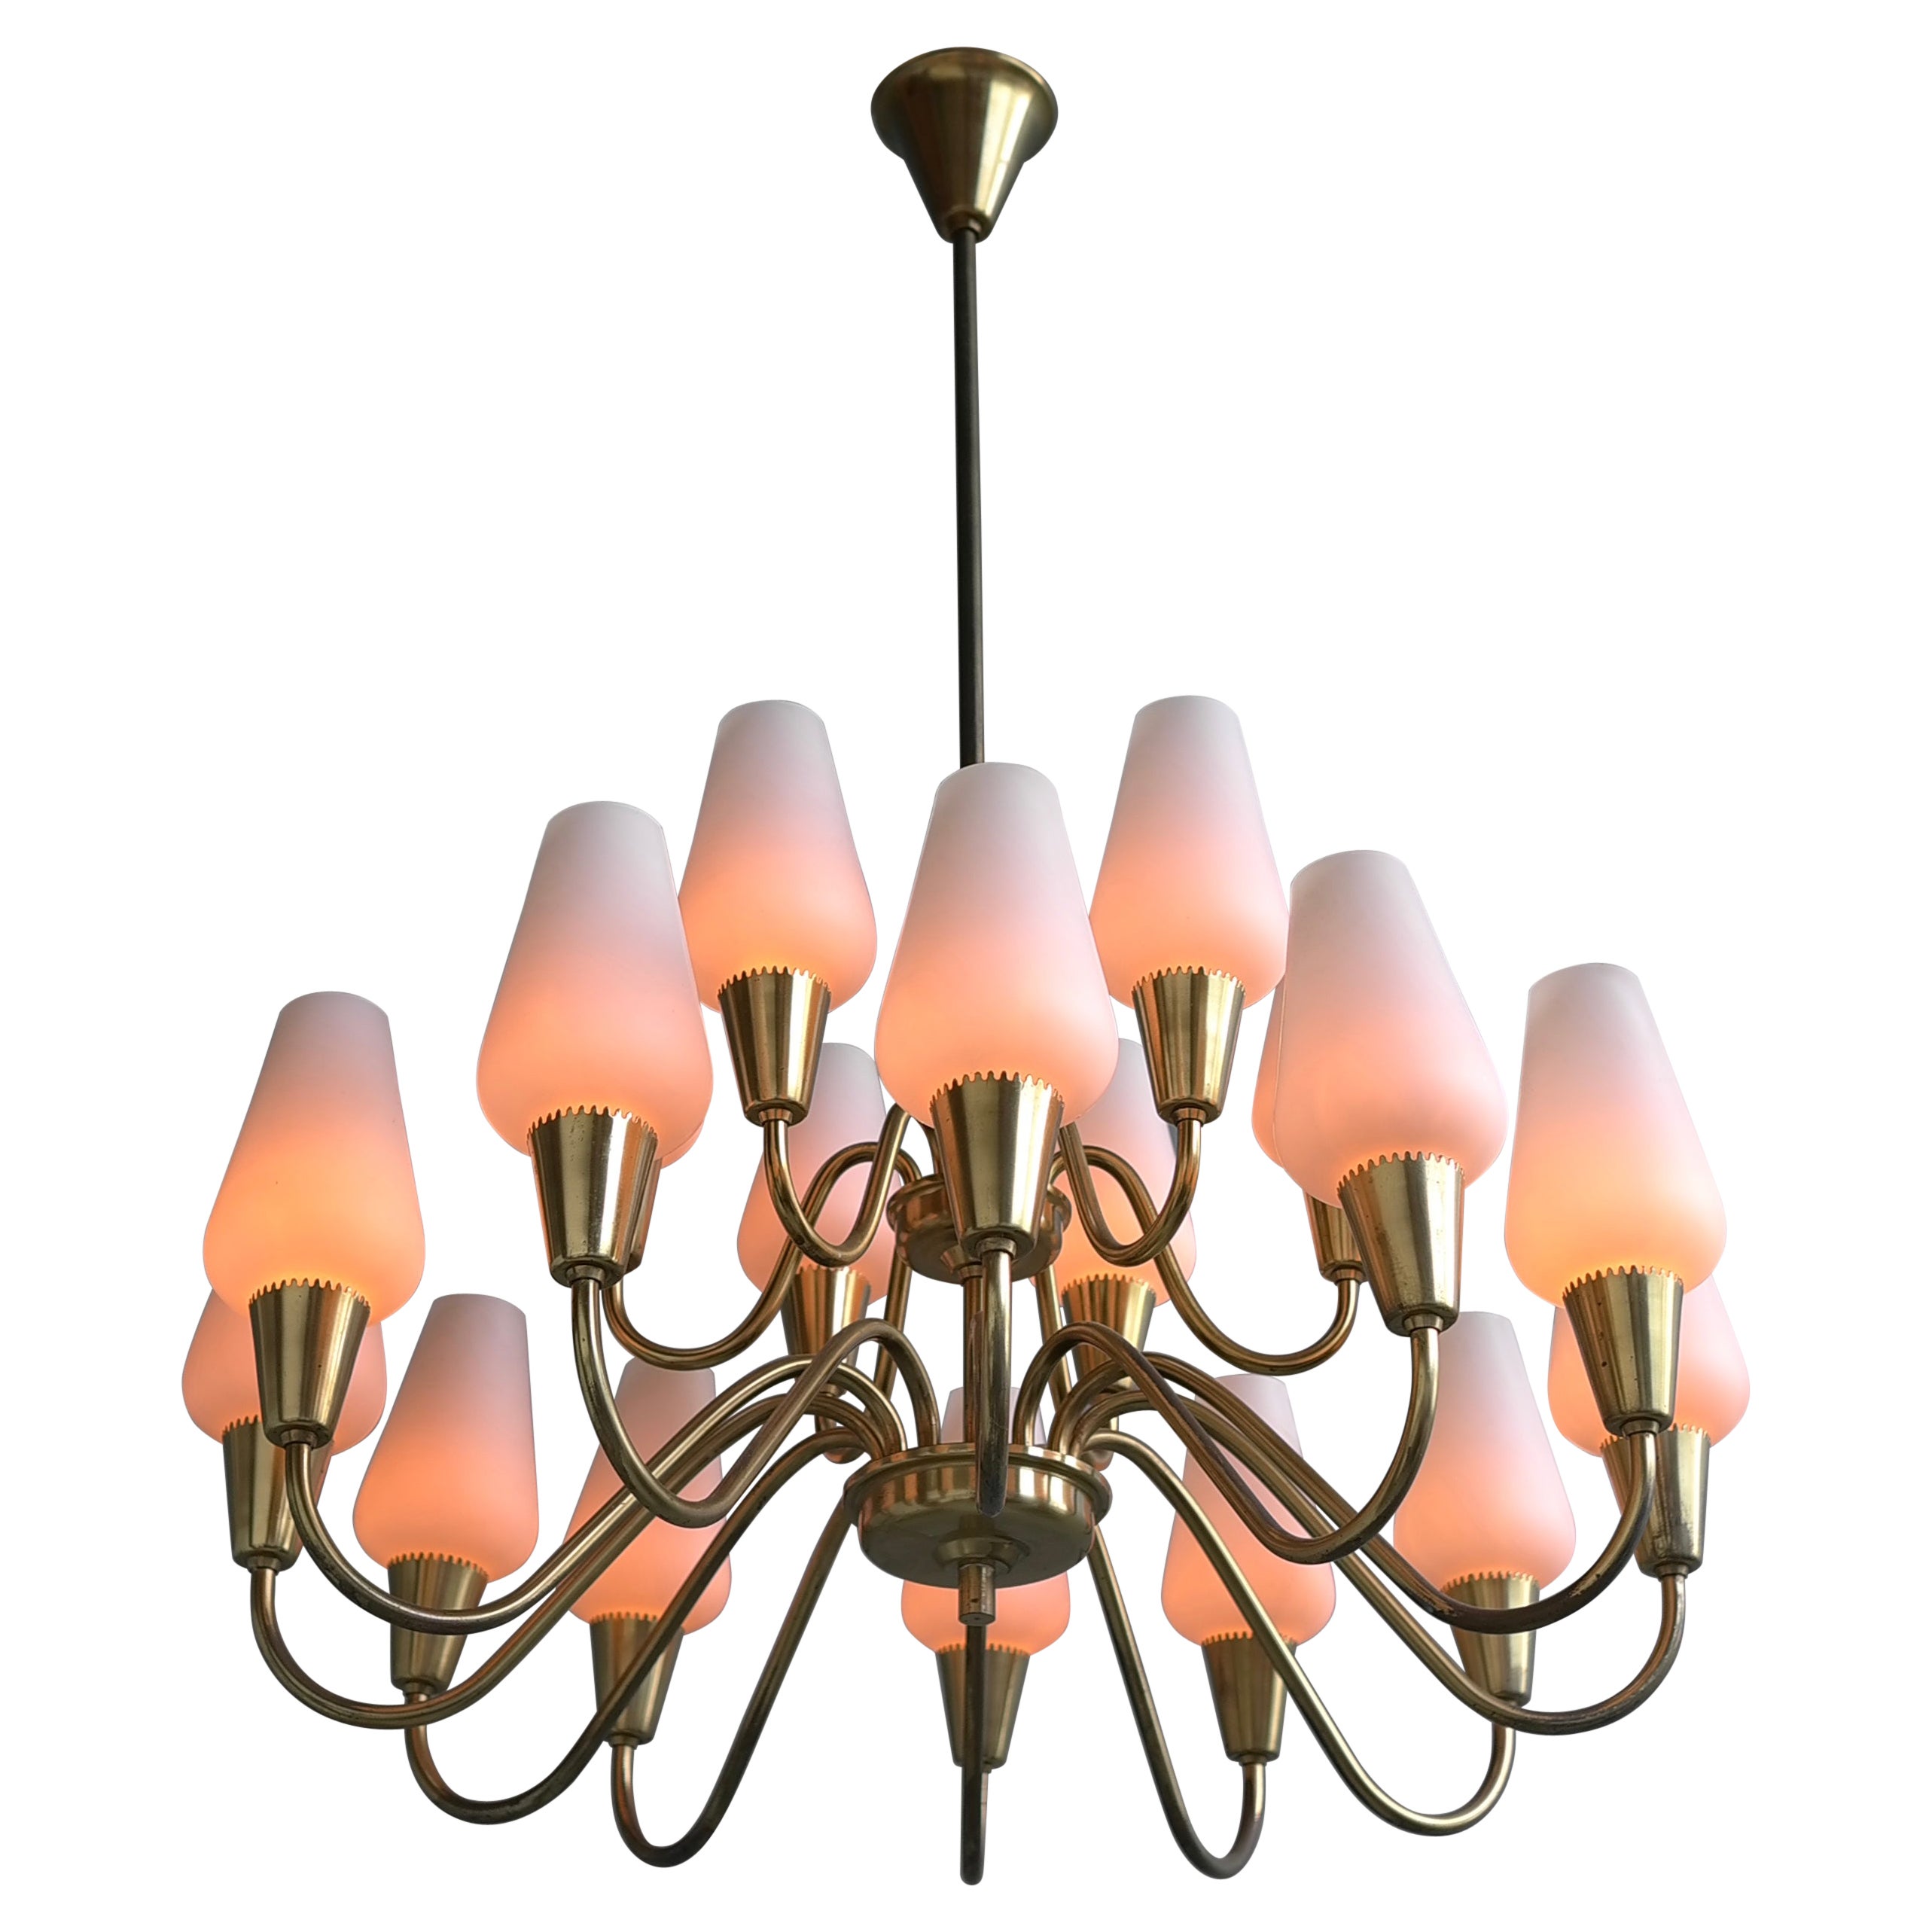 Opaline Glass and Brass Chandelier by Bent Karlby for Lyfa, Denmark 1960s For Sale